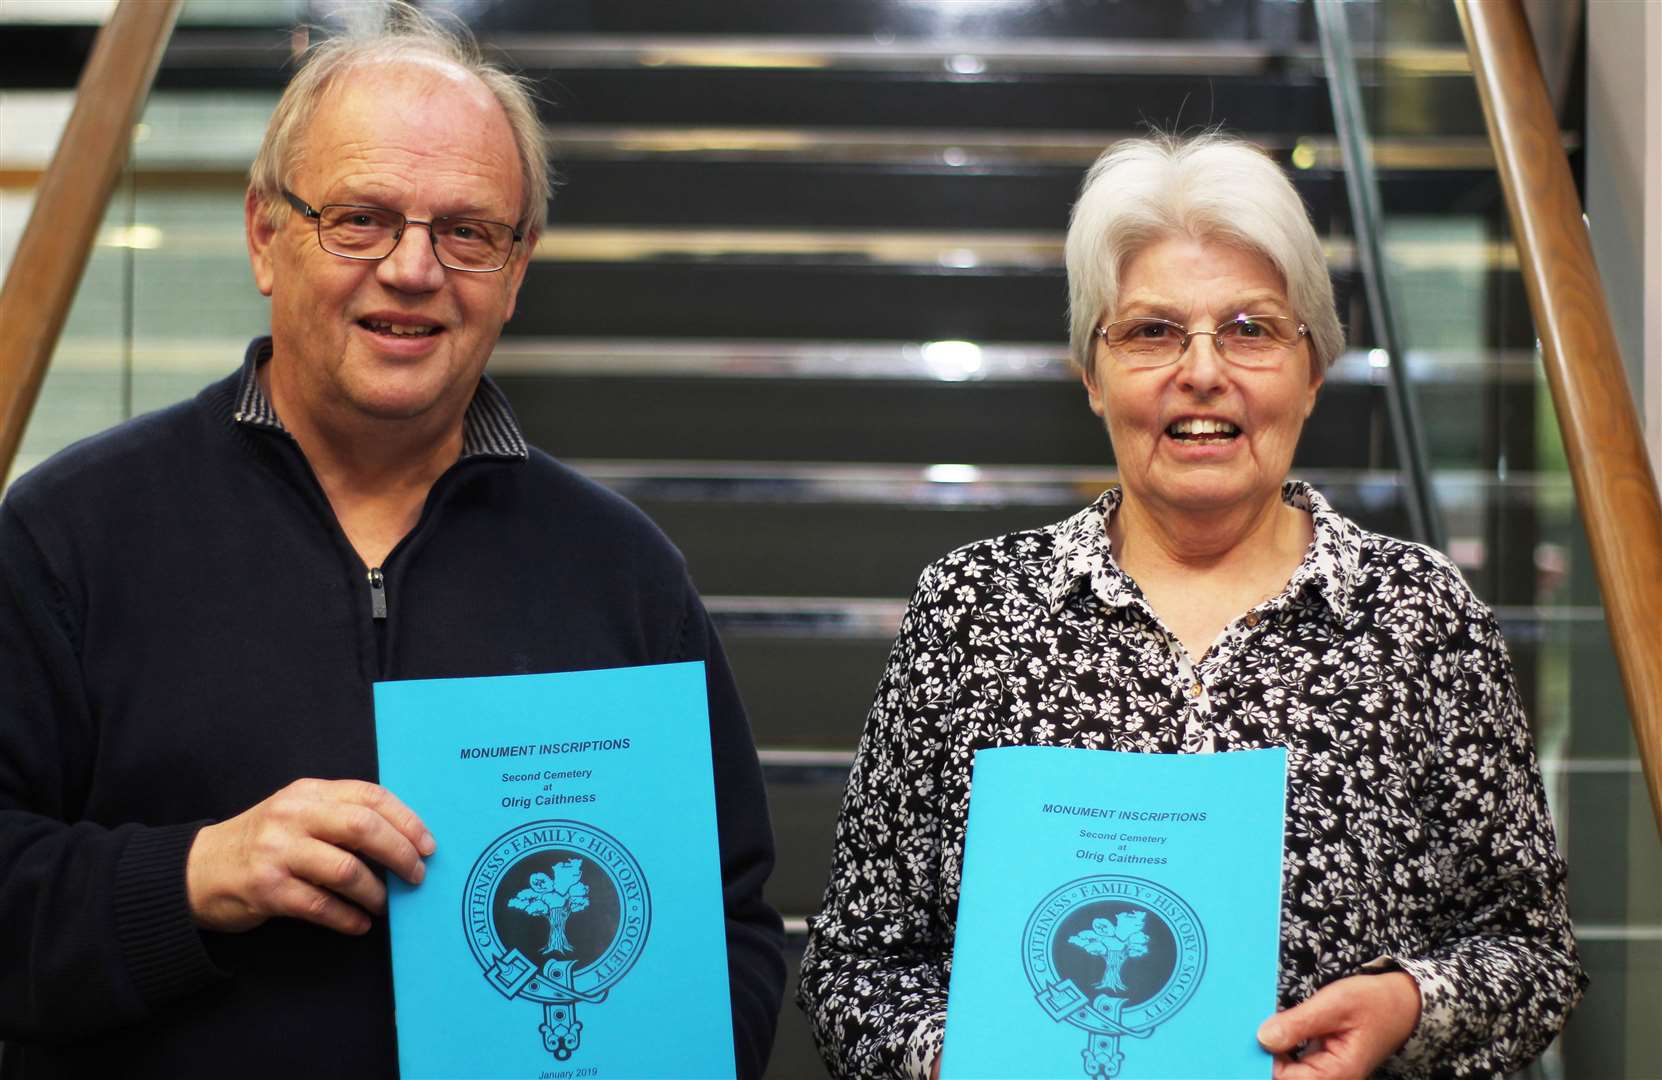 Ian Leith, vice-chairperson of Caithness Family History Society, and Anna Rogalski, the society’s publications officer, with copies of the new Olrig cemetery book at Wick's Pulteney Centre – venue for the annual conference of the Scottish Association of Family History Societies on Saturday, April 27.